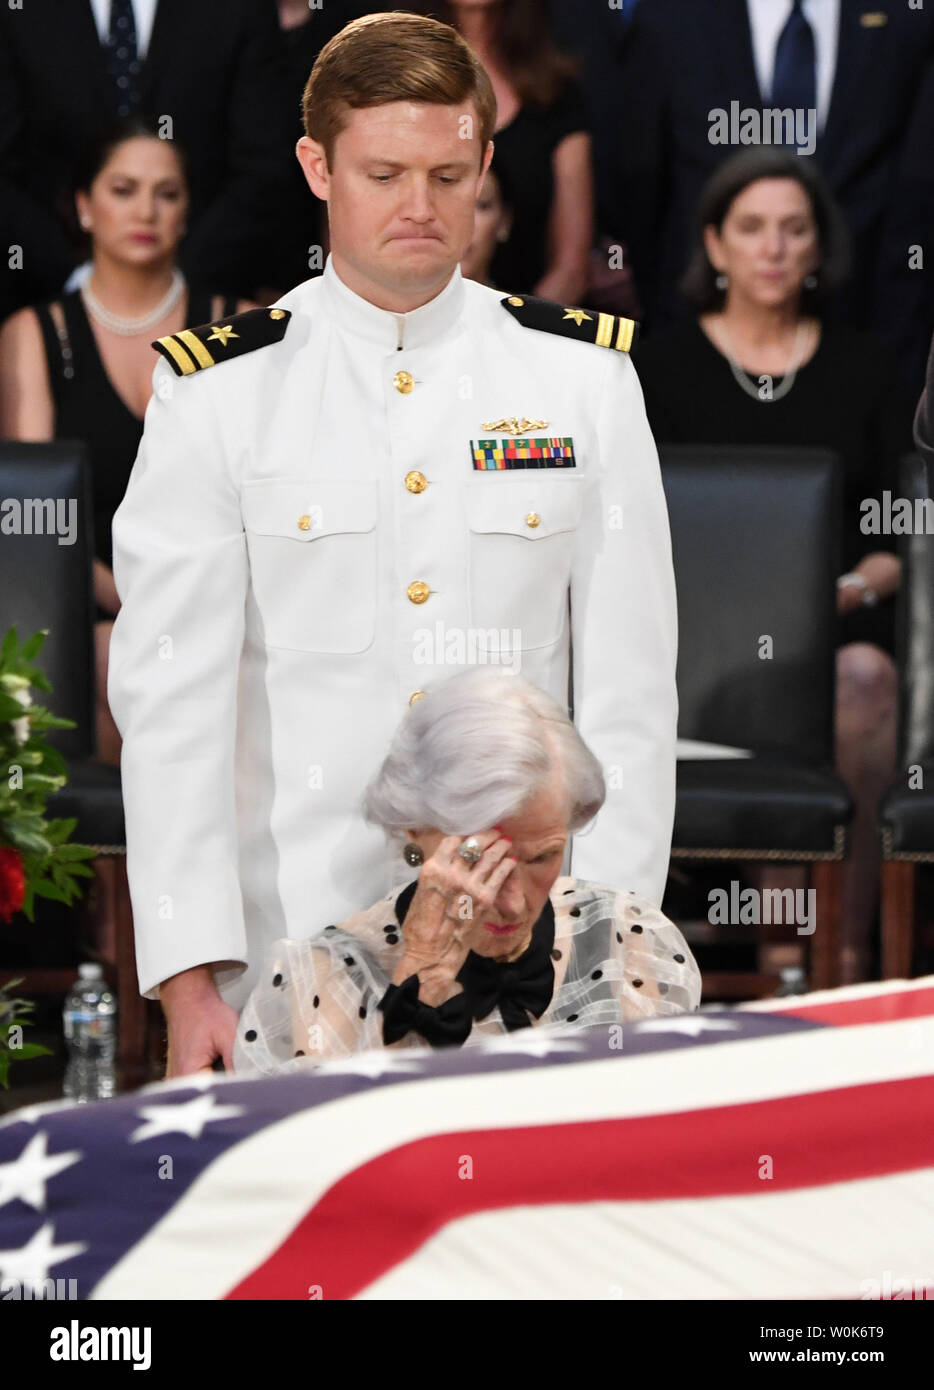 Mother Roberta McCain pays her respects by the casket of former Senator John McCain as he lies in state at the U.S. Capitol in Washington, DC on Friday, August 31, 2018.  McCain, an Arizona Republican, presidential candidate, and war hero, died August 25th at the age of 81. He is the 31st person to lie in state at the Capitol in 166 years.    Photo by Pat Benic/UPI Stock Photo